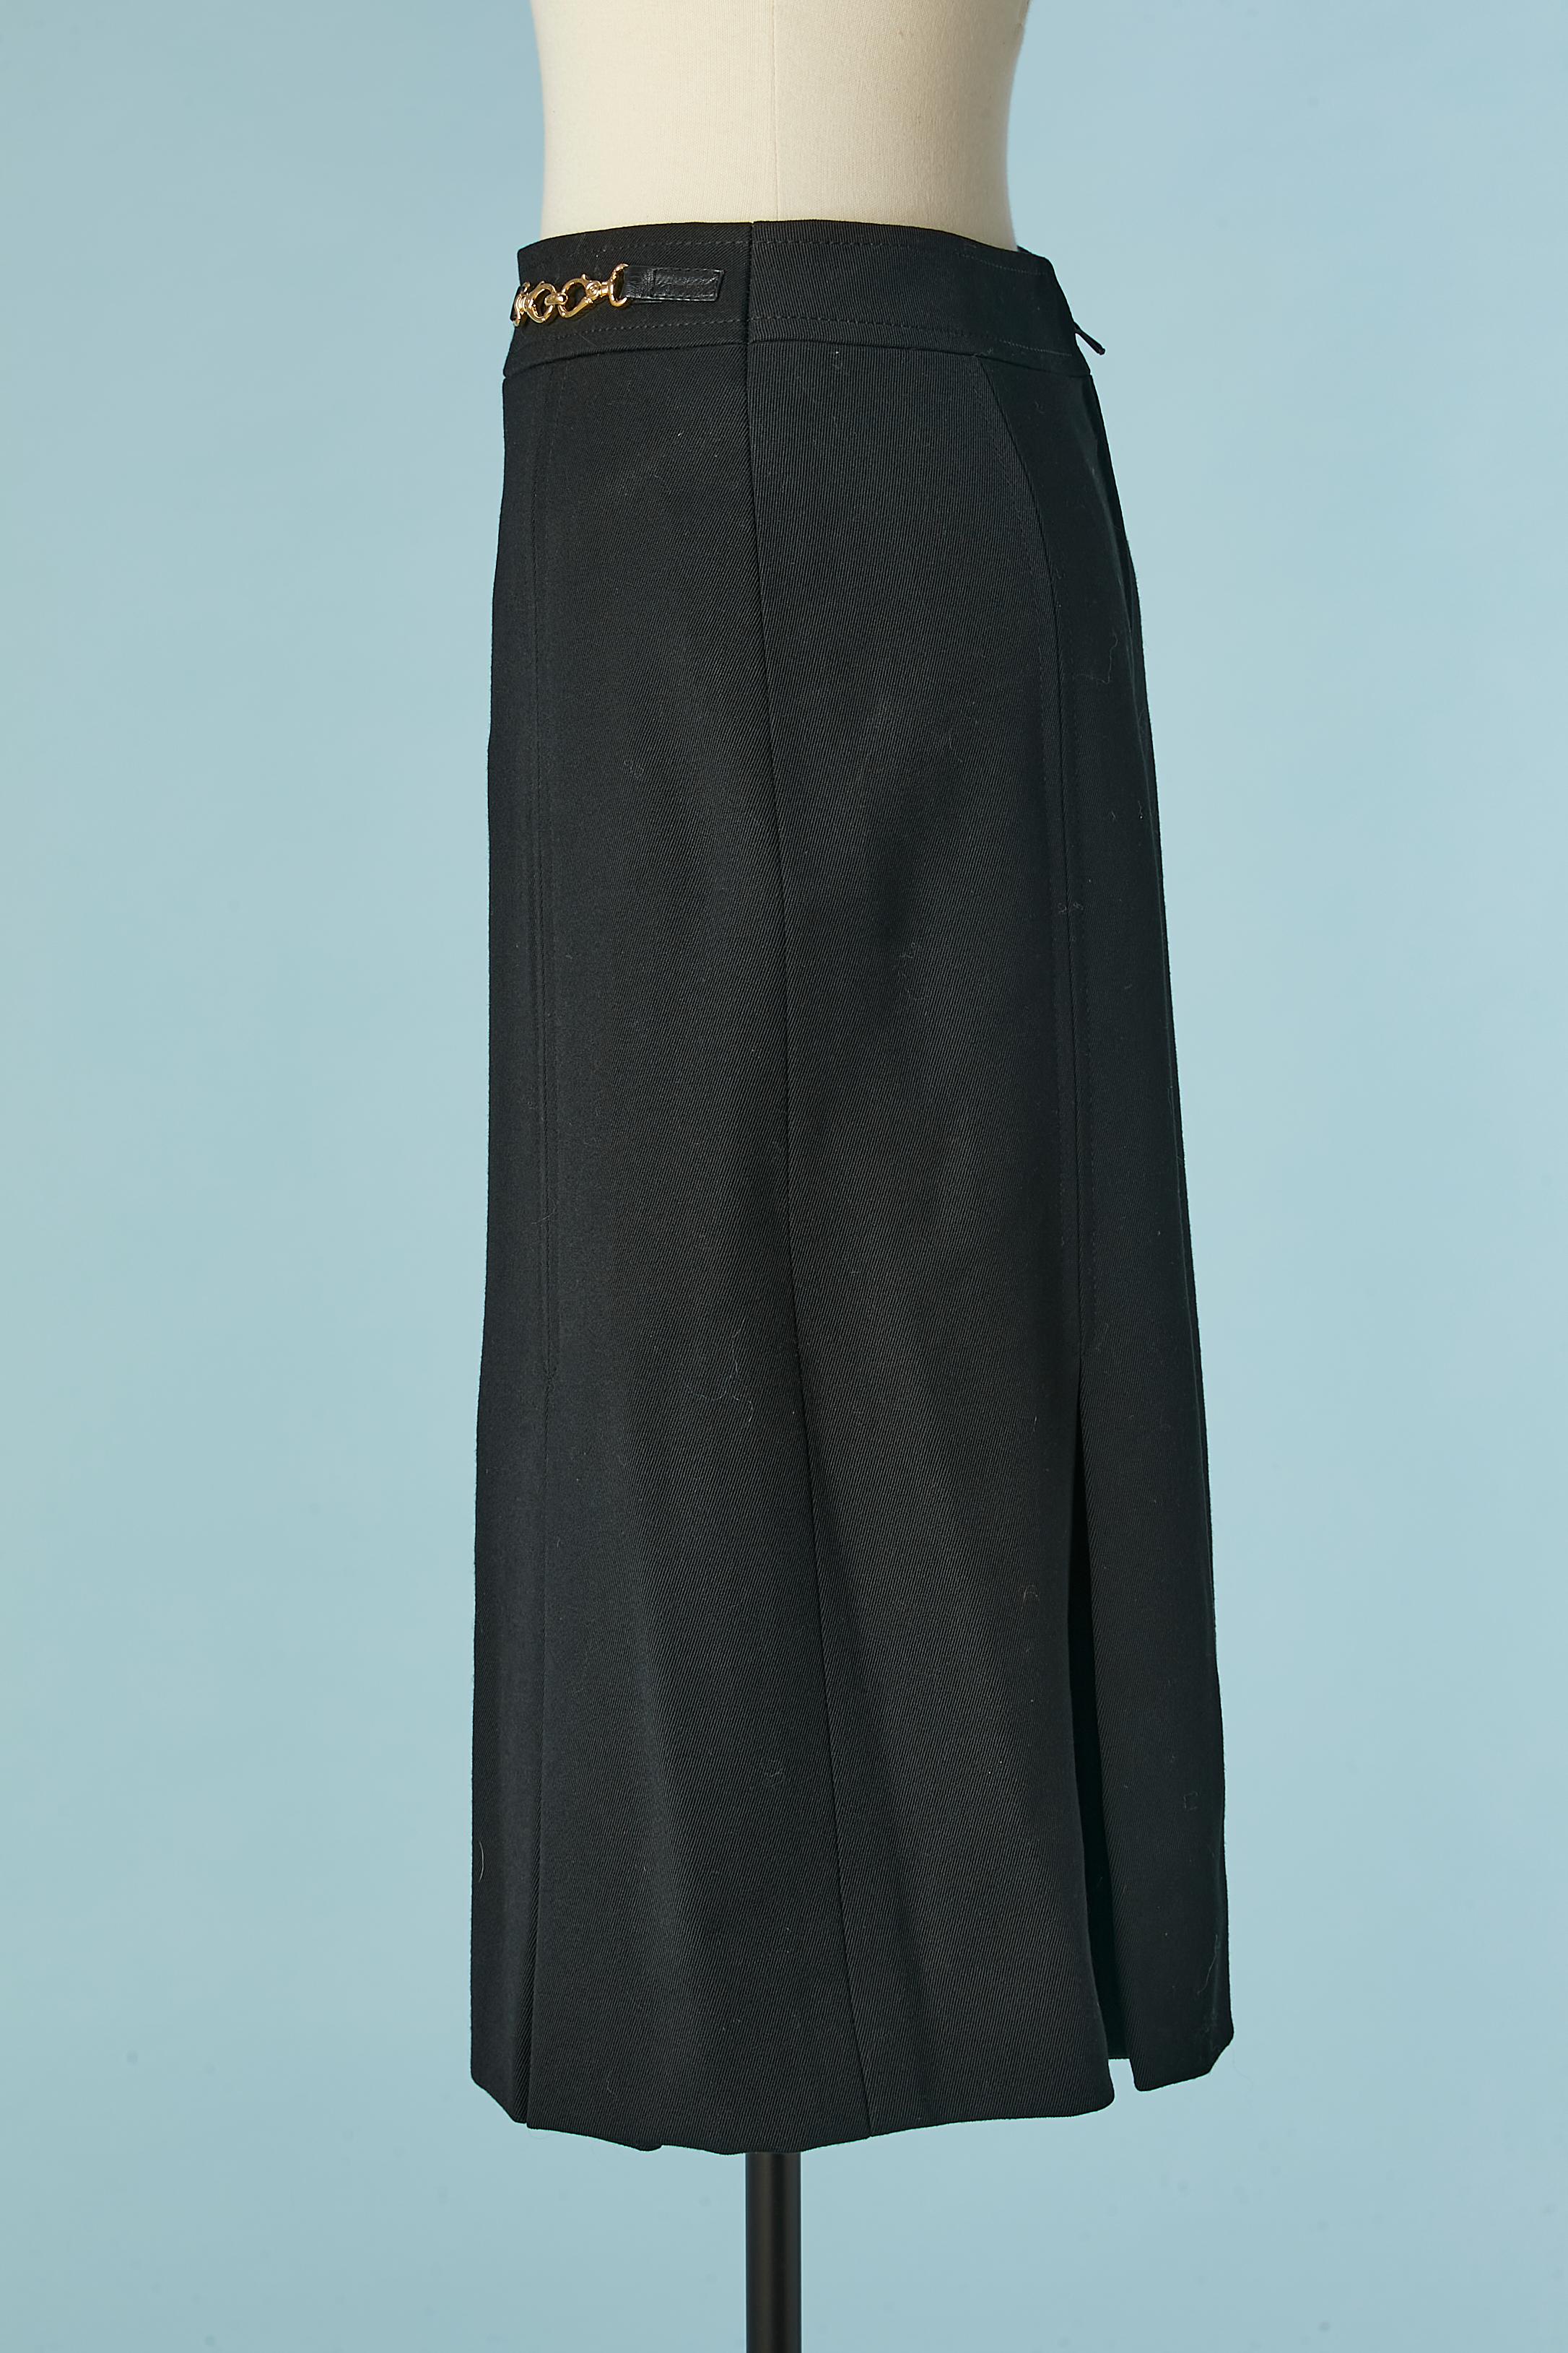 Black wool skirt with box pleats and gold metal buckle on the waist CELINE In Excellent Condition For Sale In Saint-Ouen-Sur-Seine, FR